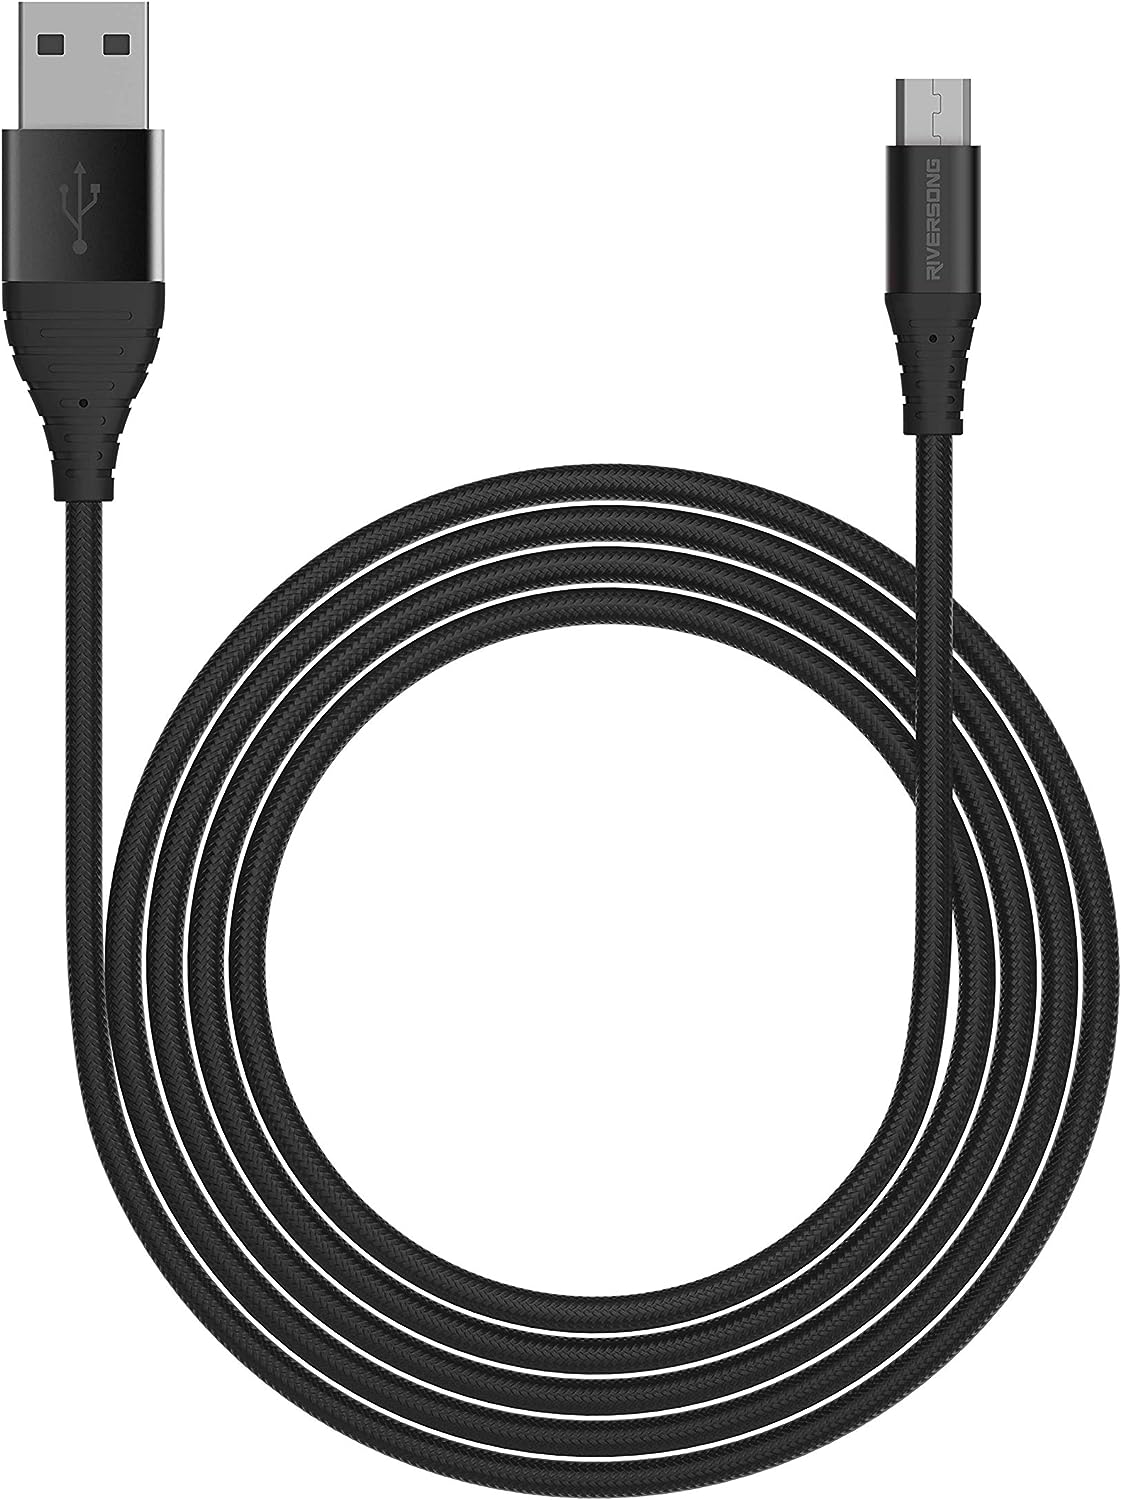 Riversong Alpha S USB-A to Micro USB Charging Cable, 1 Meter, Black - CM32